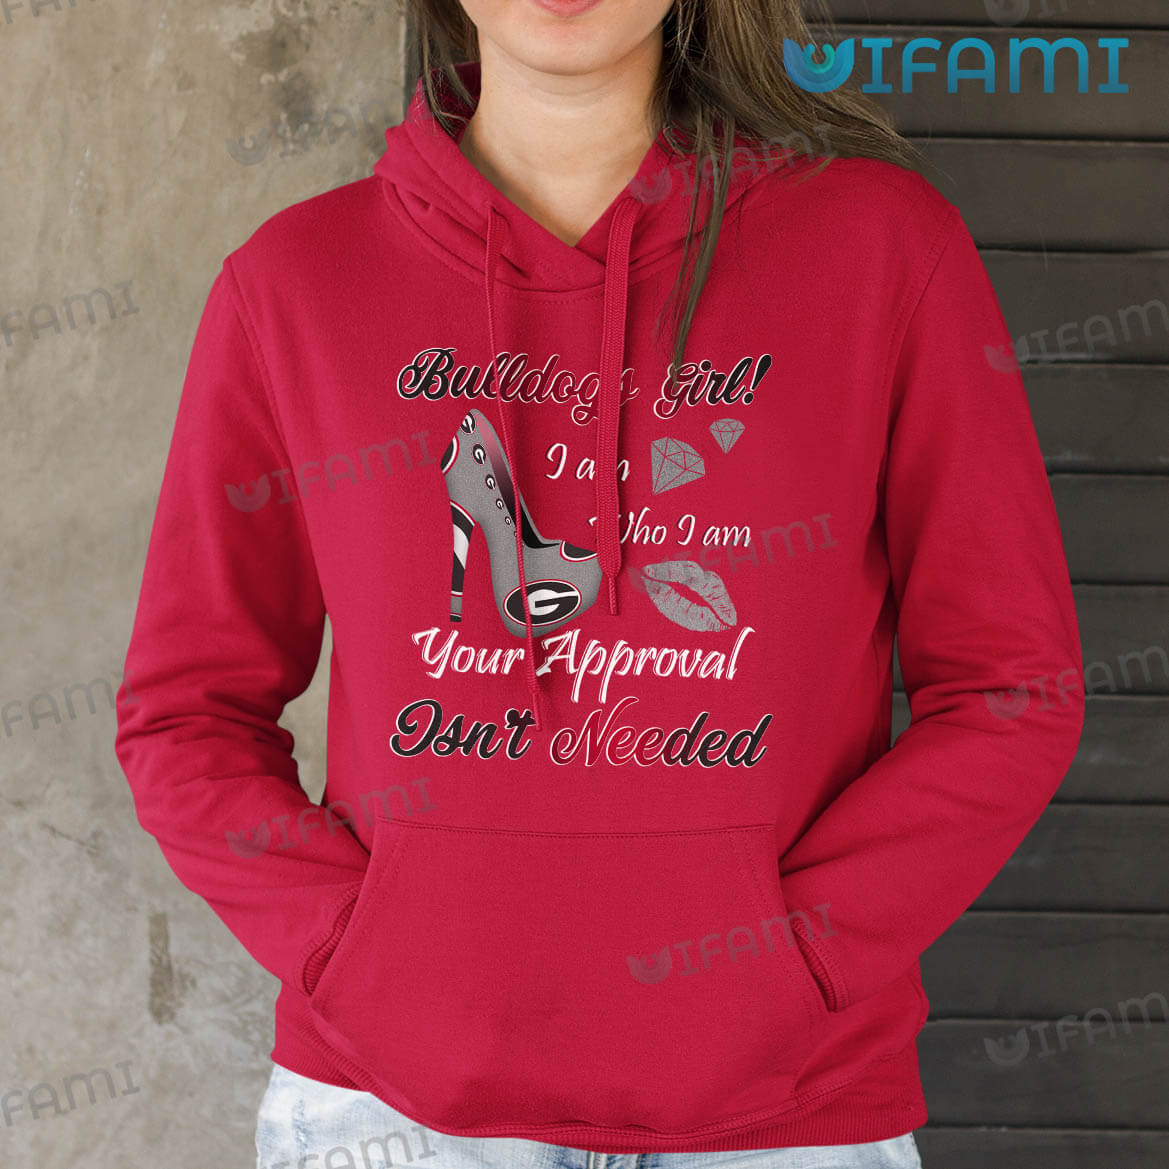 Georgia Bulldogs Shirt Bulldogs Girl I Am Who I Am Your Approval Isn't Needed Gift